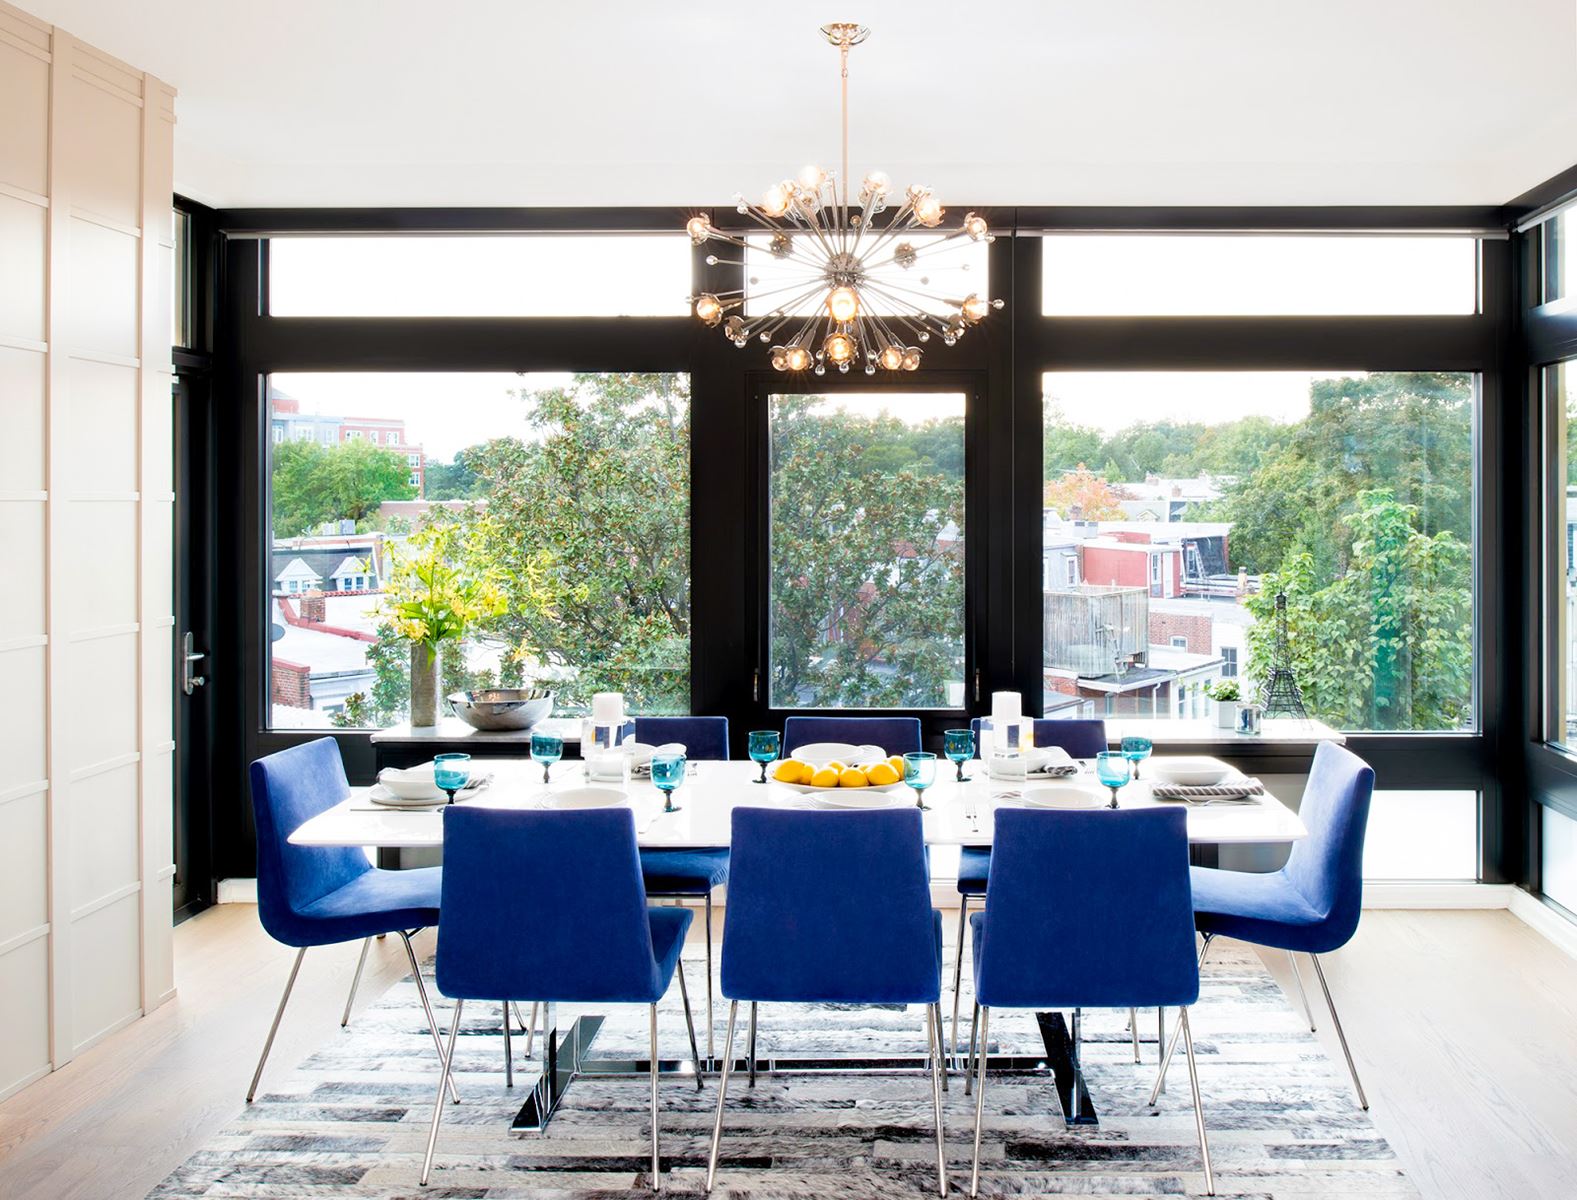 4 Home Design Ideas With Blue Upholstered Dining Chairs